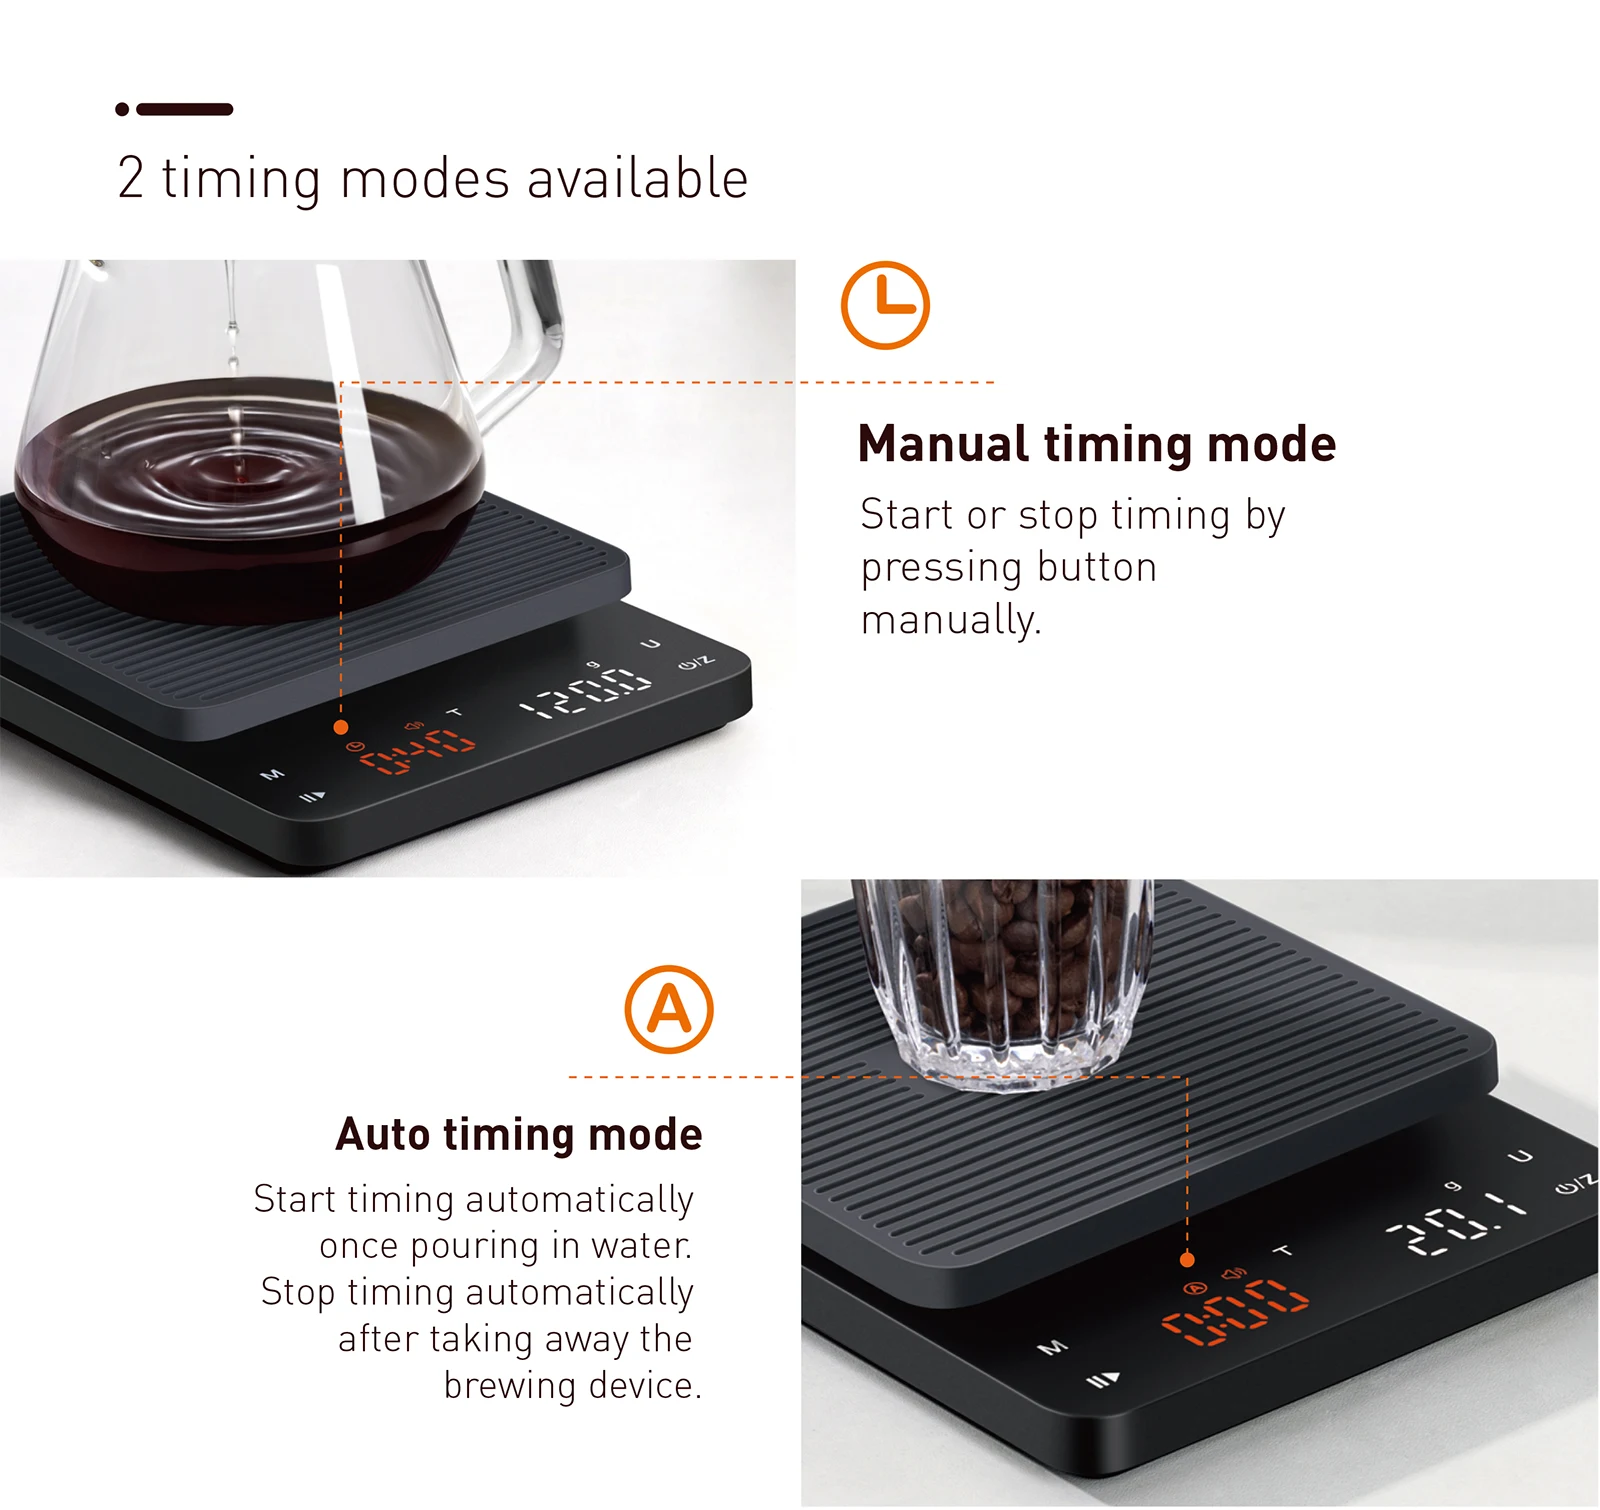 BAGAIL Kitchen Scale with Timer, 0.1g High Precision Coffee Scale